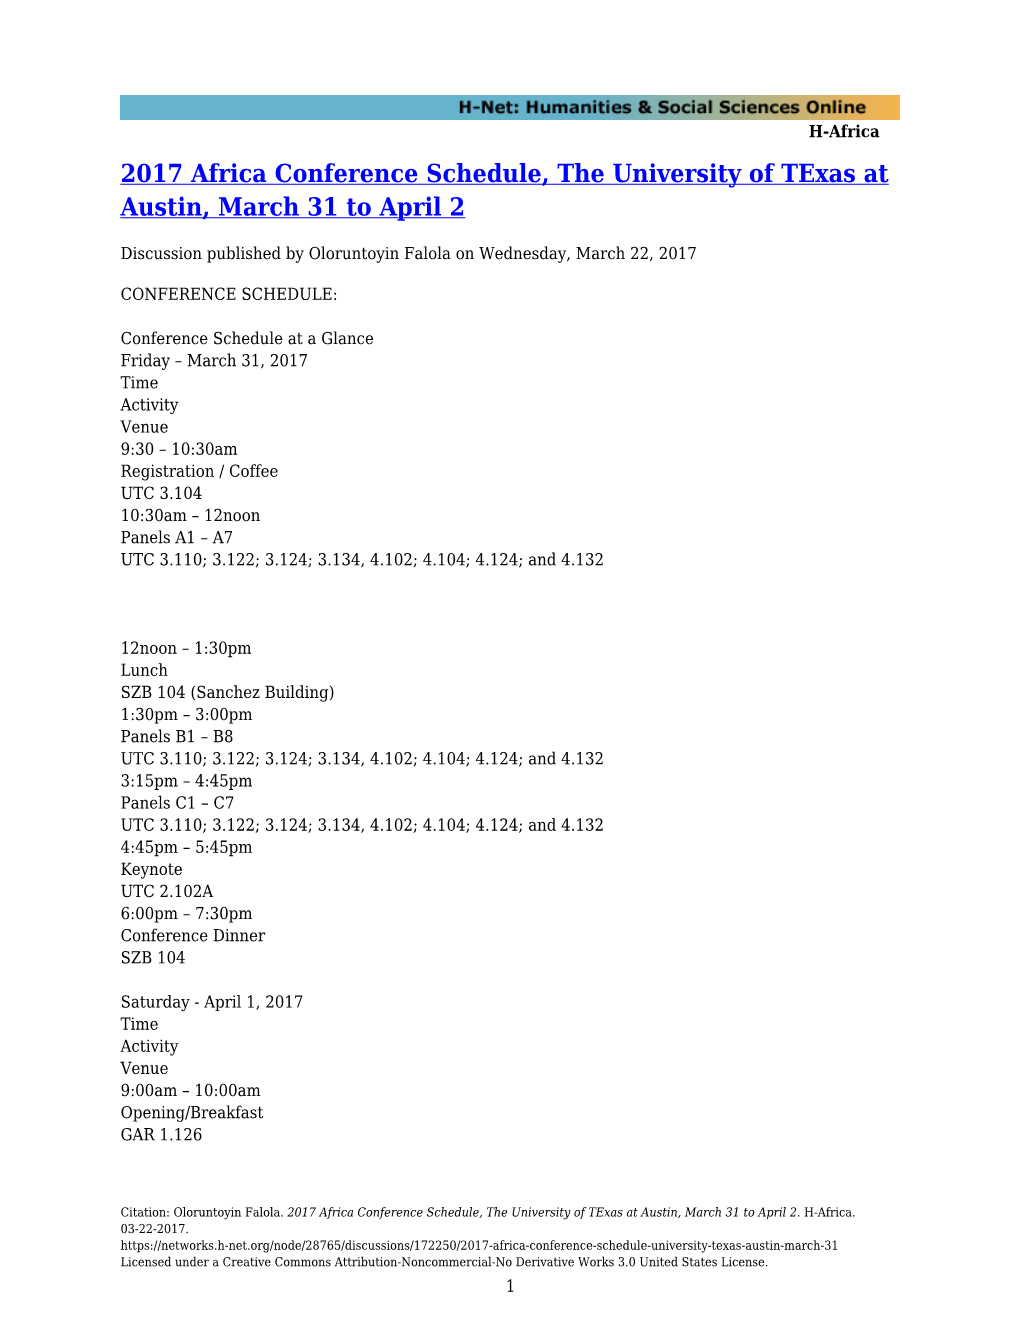 2017 Africa Conference Schedule, the University of Texas at Austin, March 31 to April 2